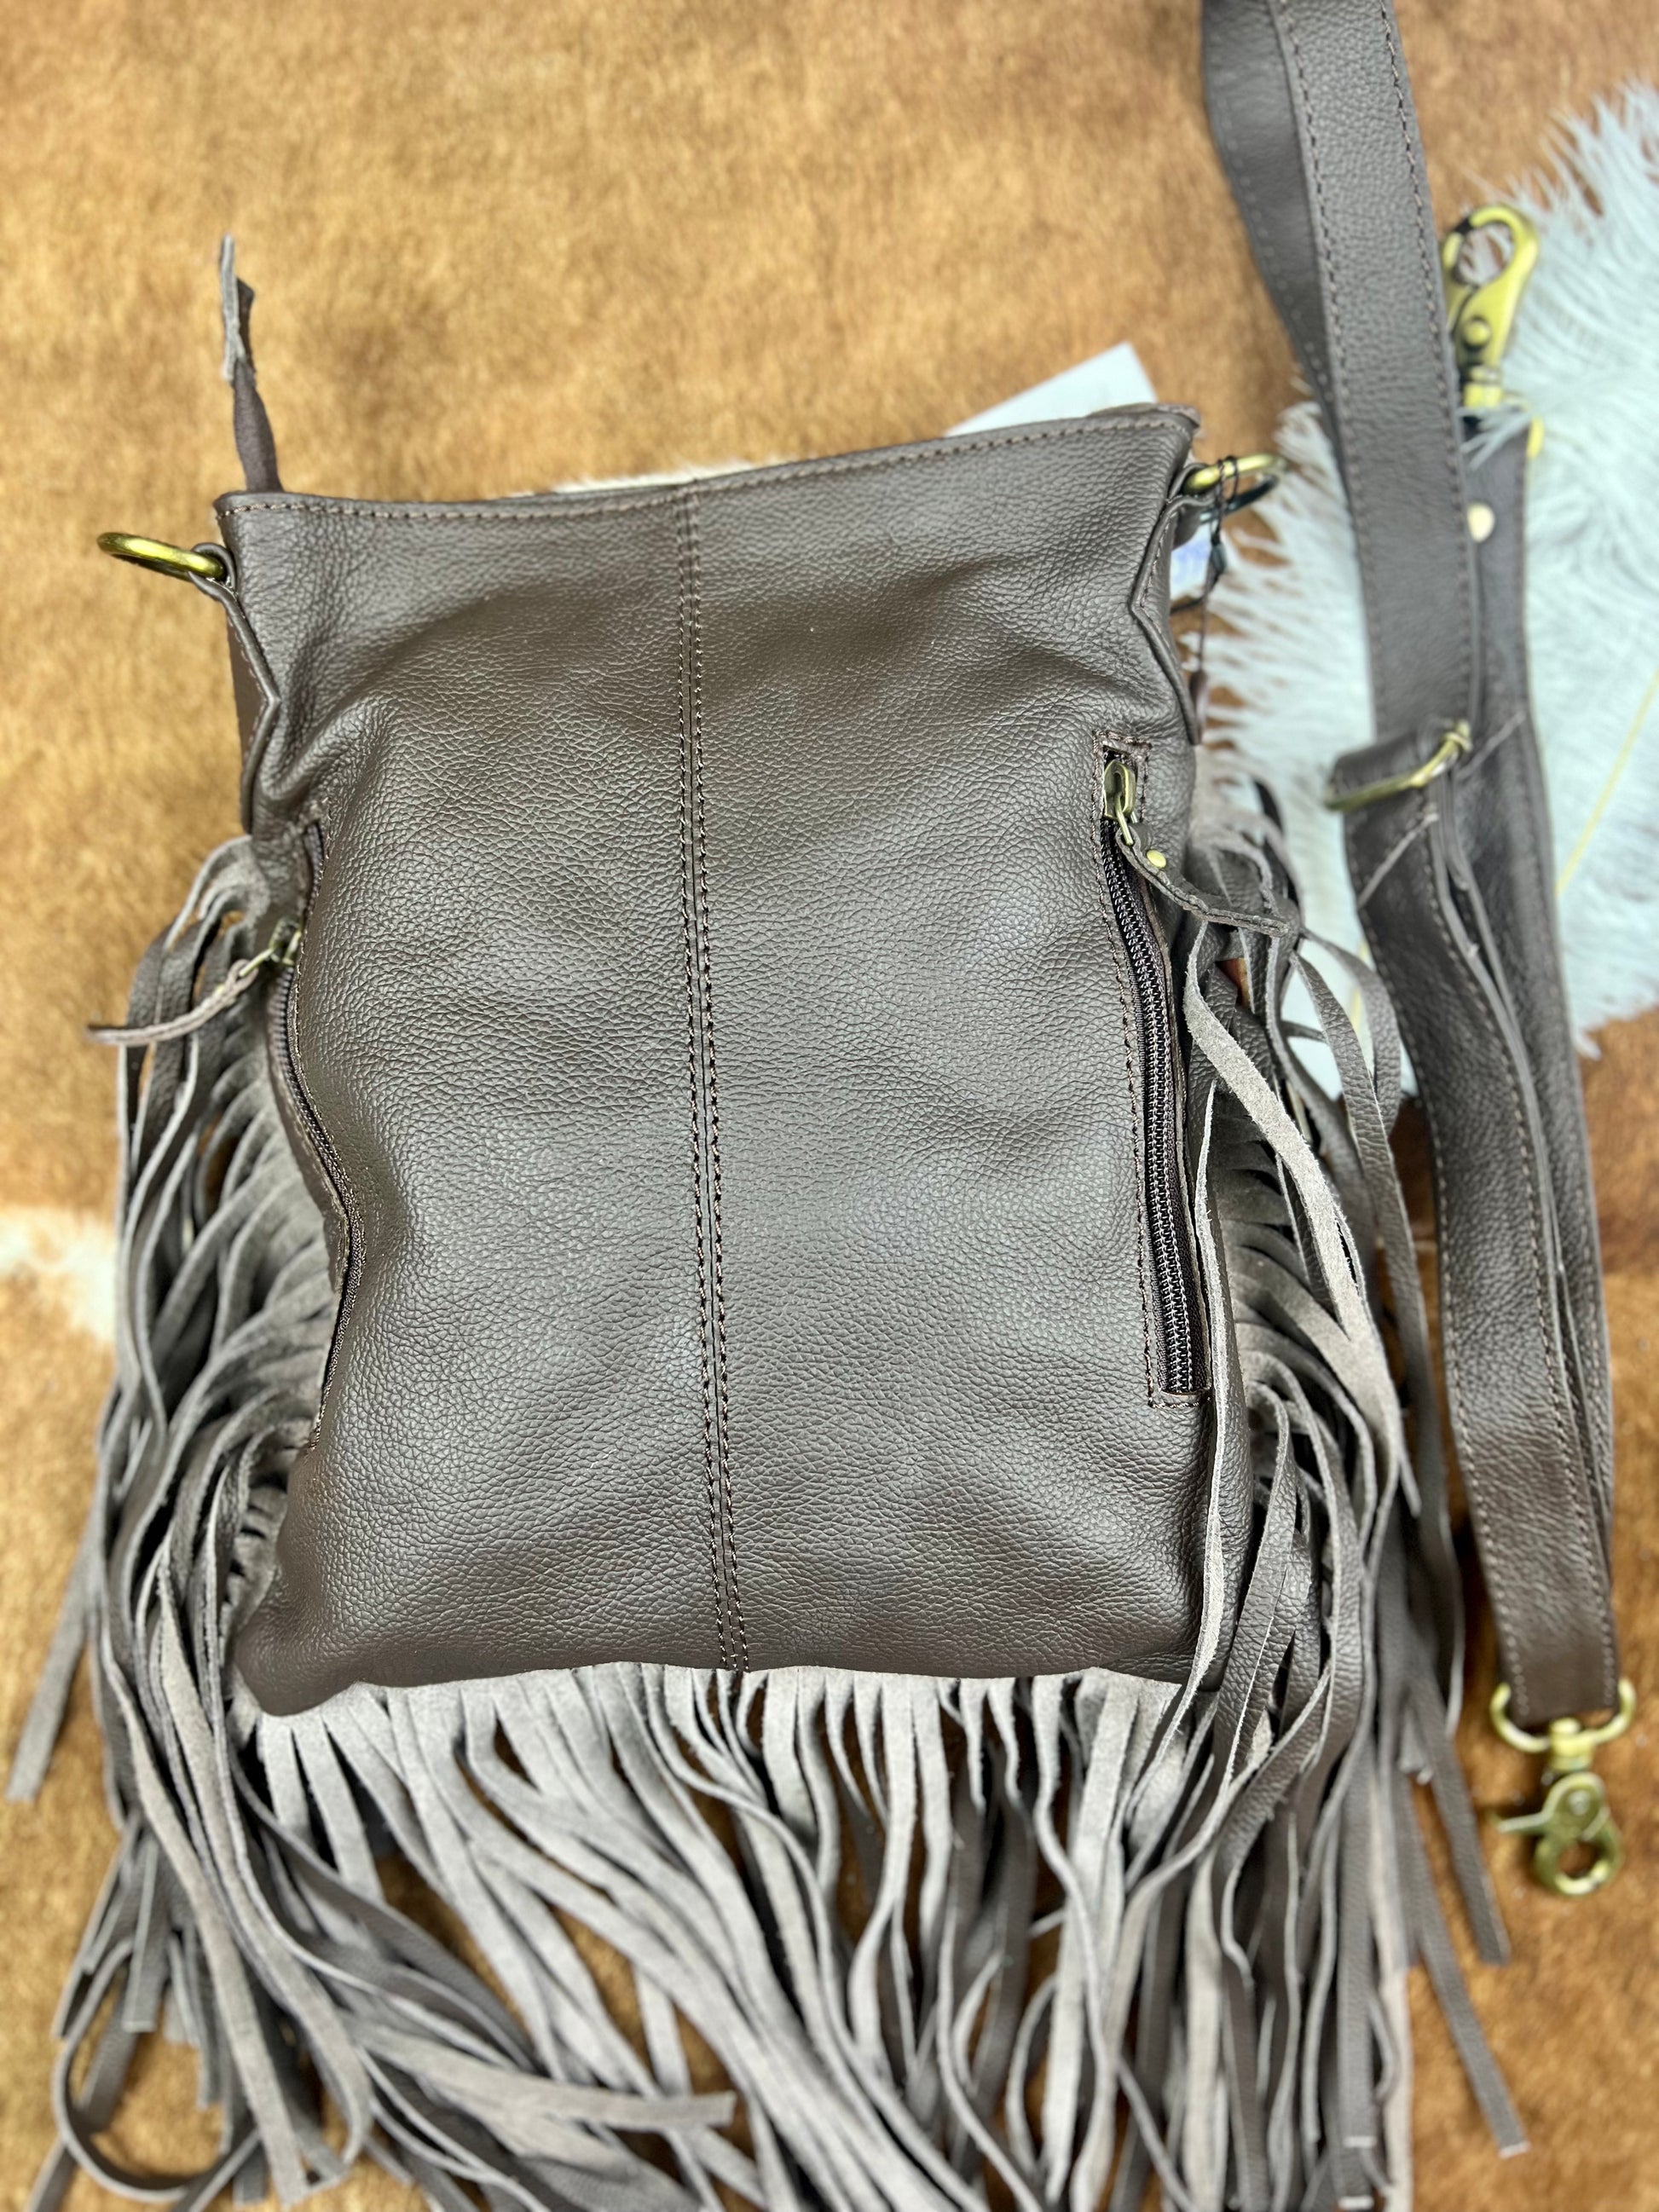 Cora Cowhide Fringe Purse by Countryside Co.